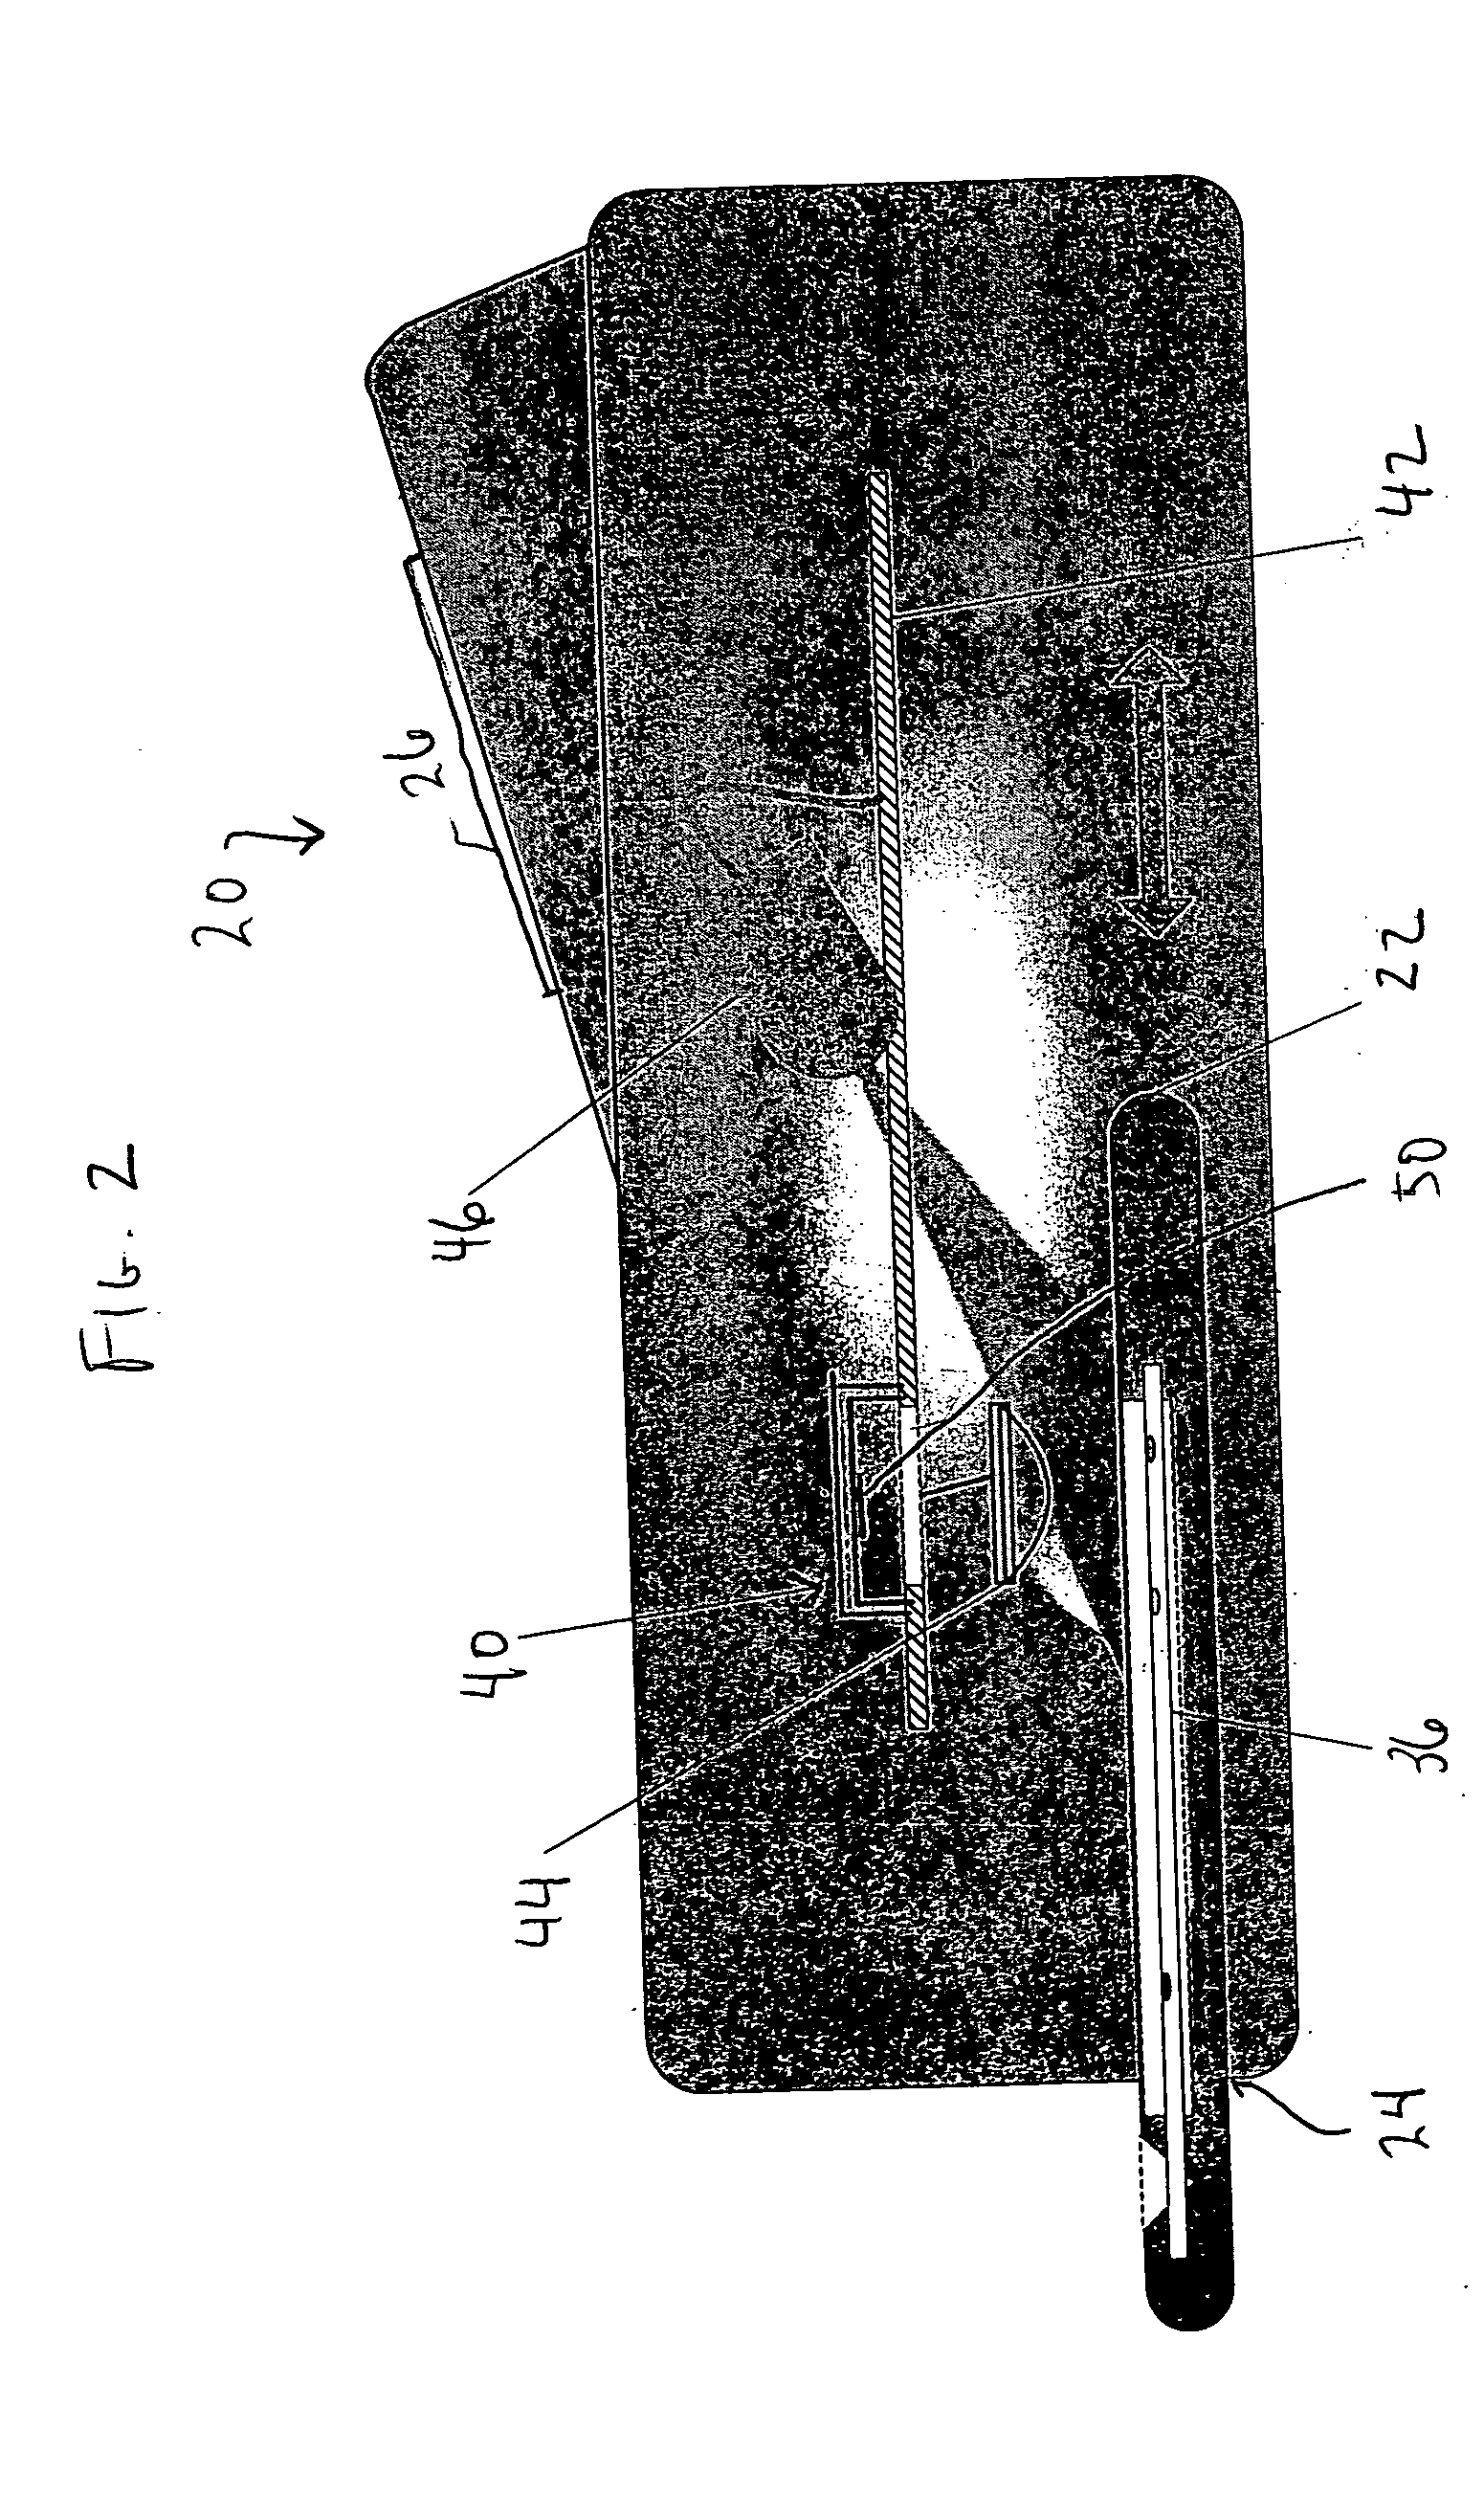 Apparatus and method for using optical mouse engine to determine speed, direction, position of scanned device and to obtain quantitative or qualitative data from same